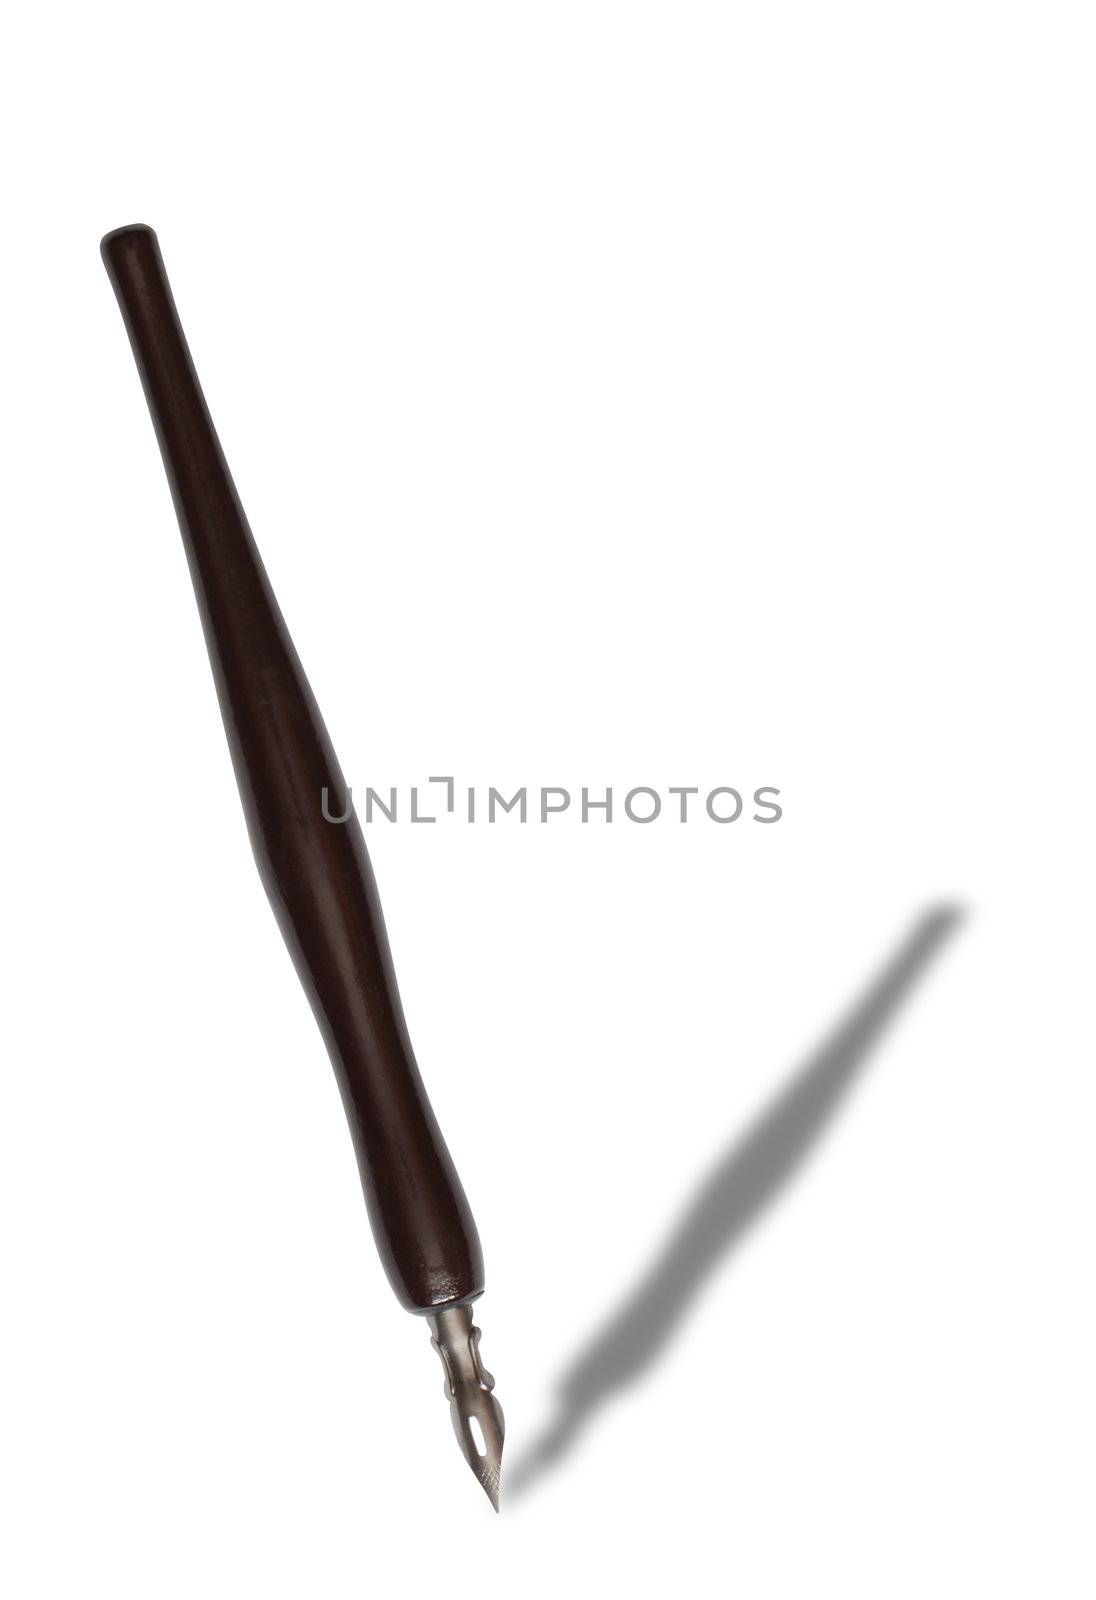 Vintage fountain pen with wooden handle. Isolated on white with clipping path